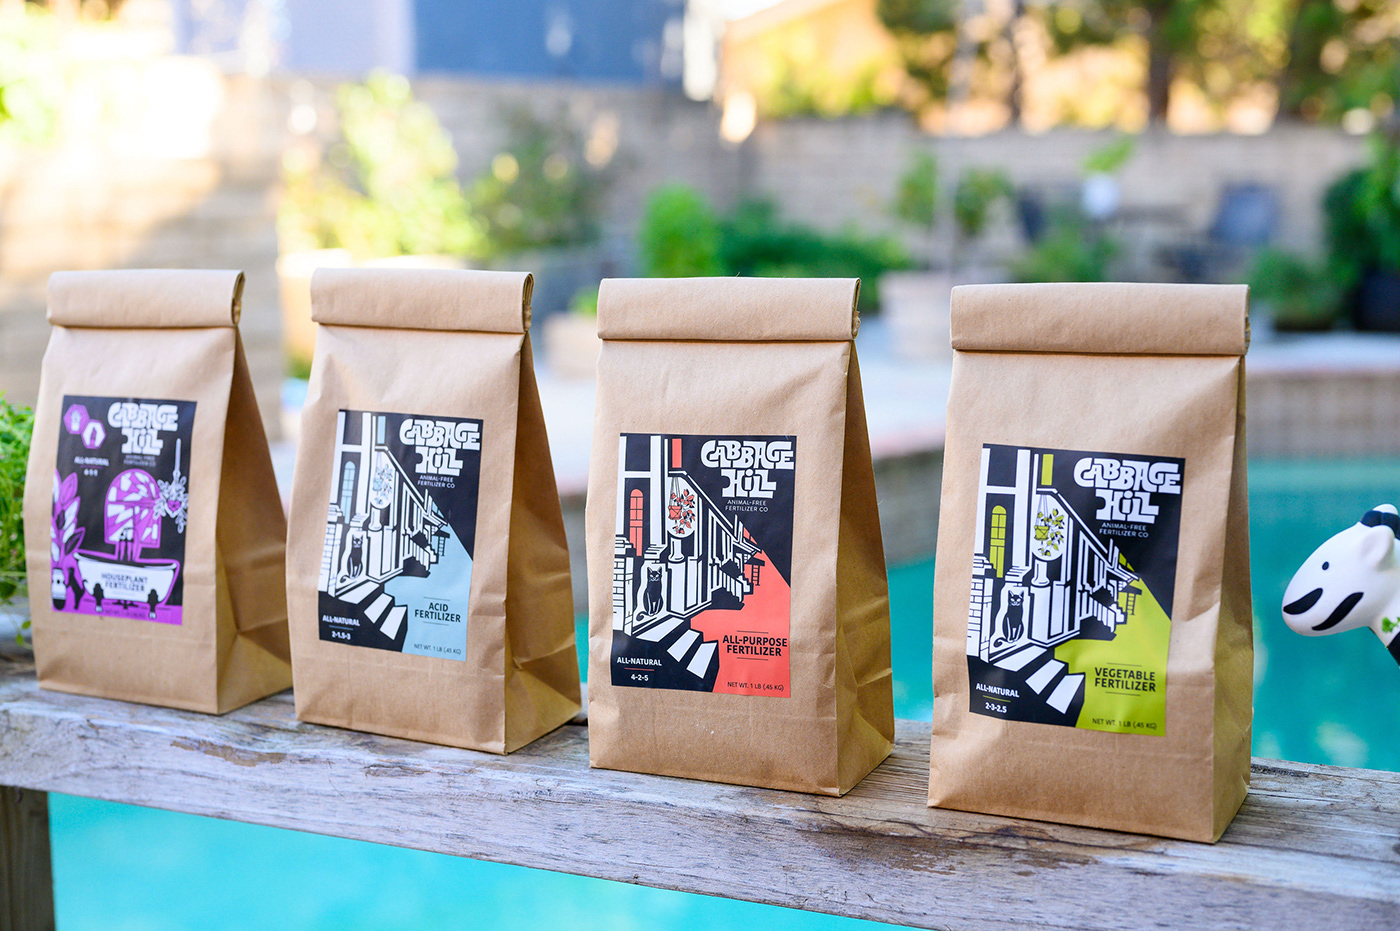 Brown bags of fertilizer with label design and branding illustrations of cat.